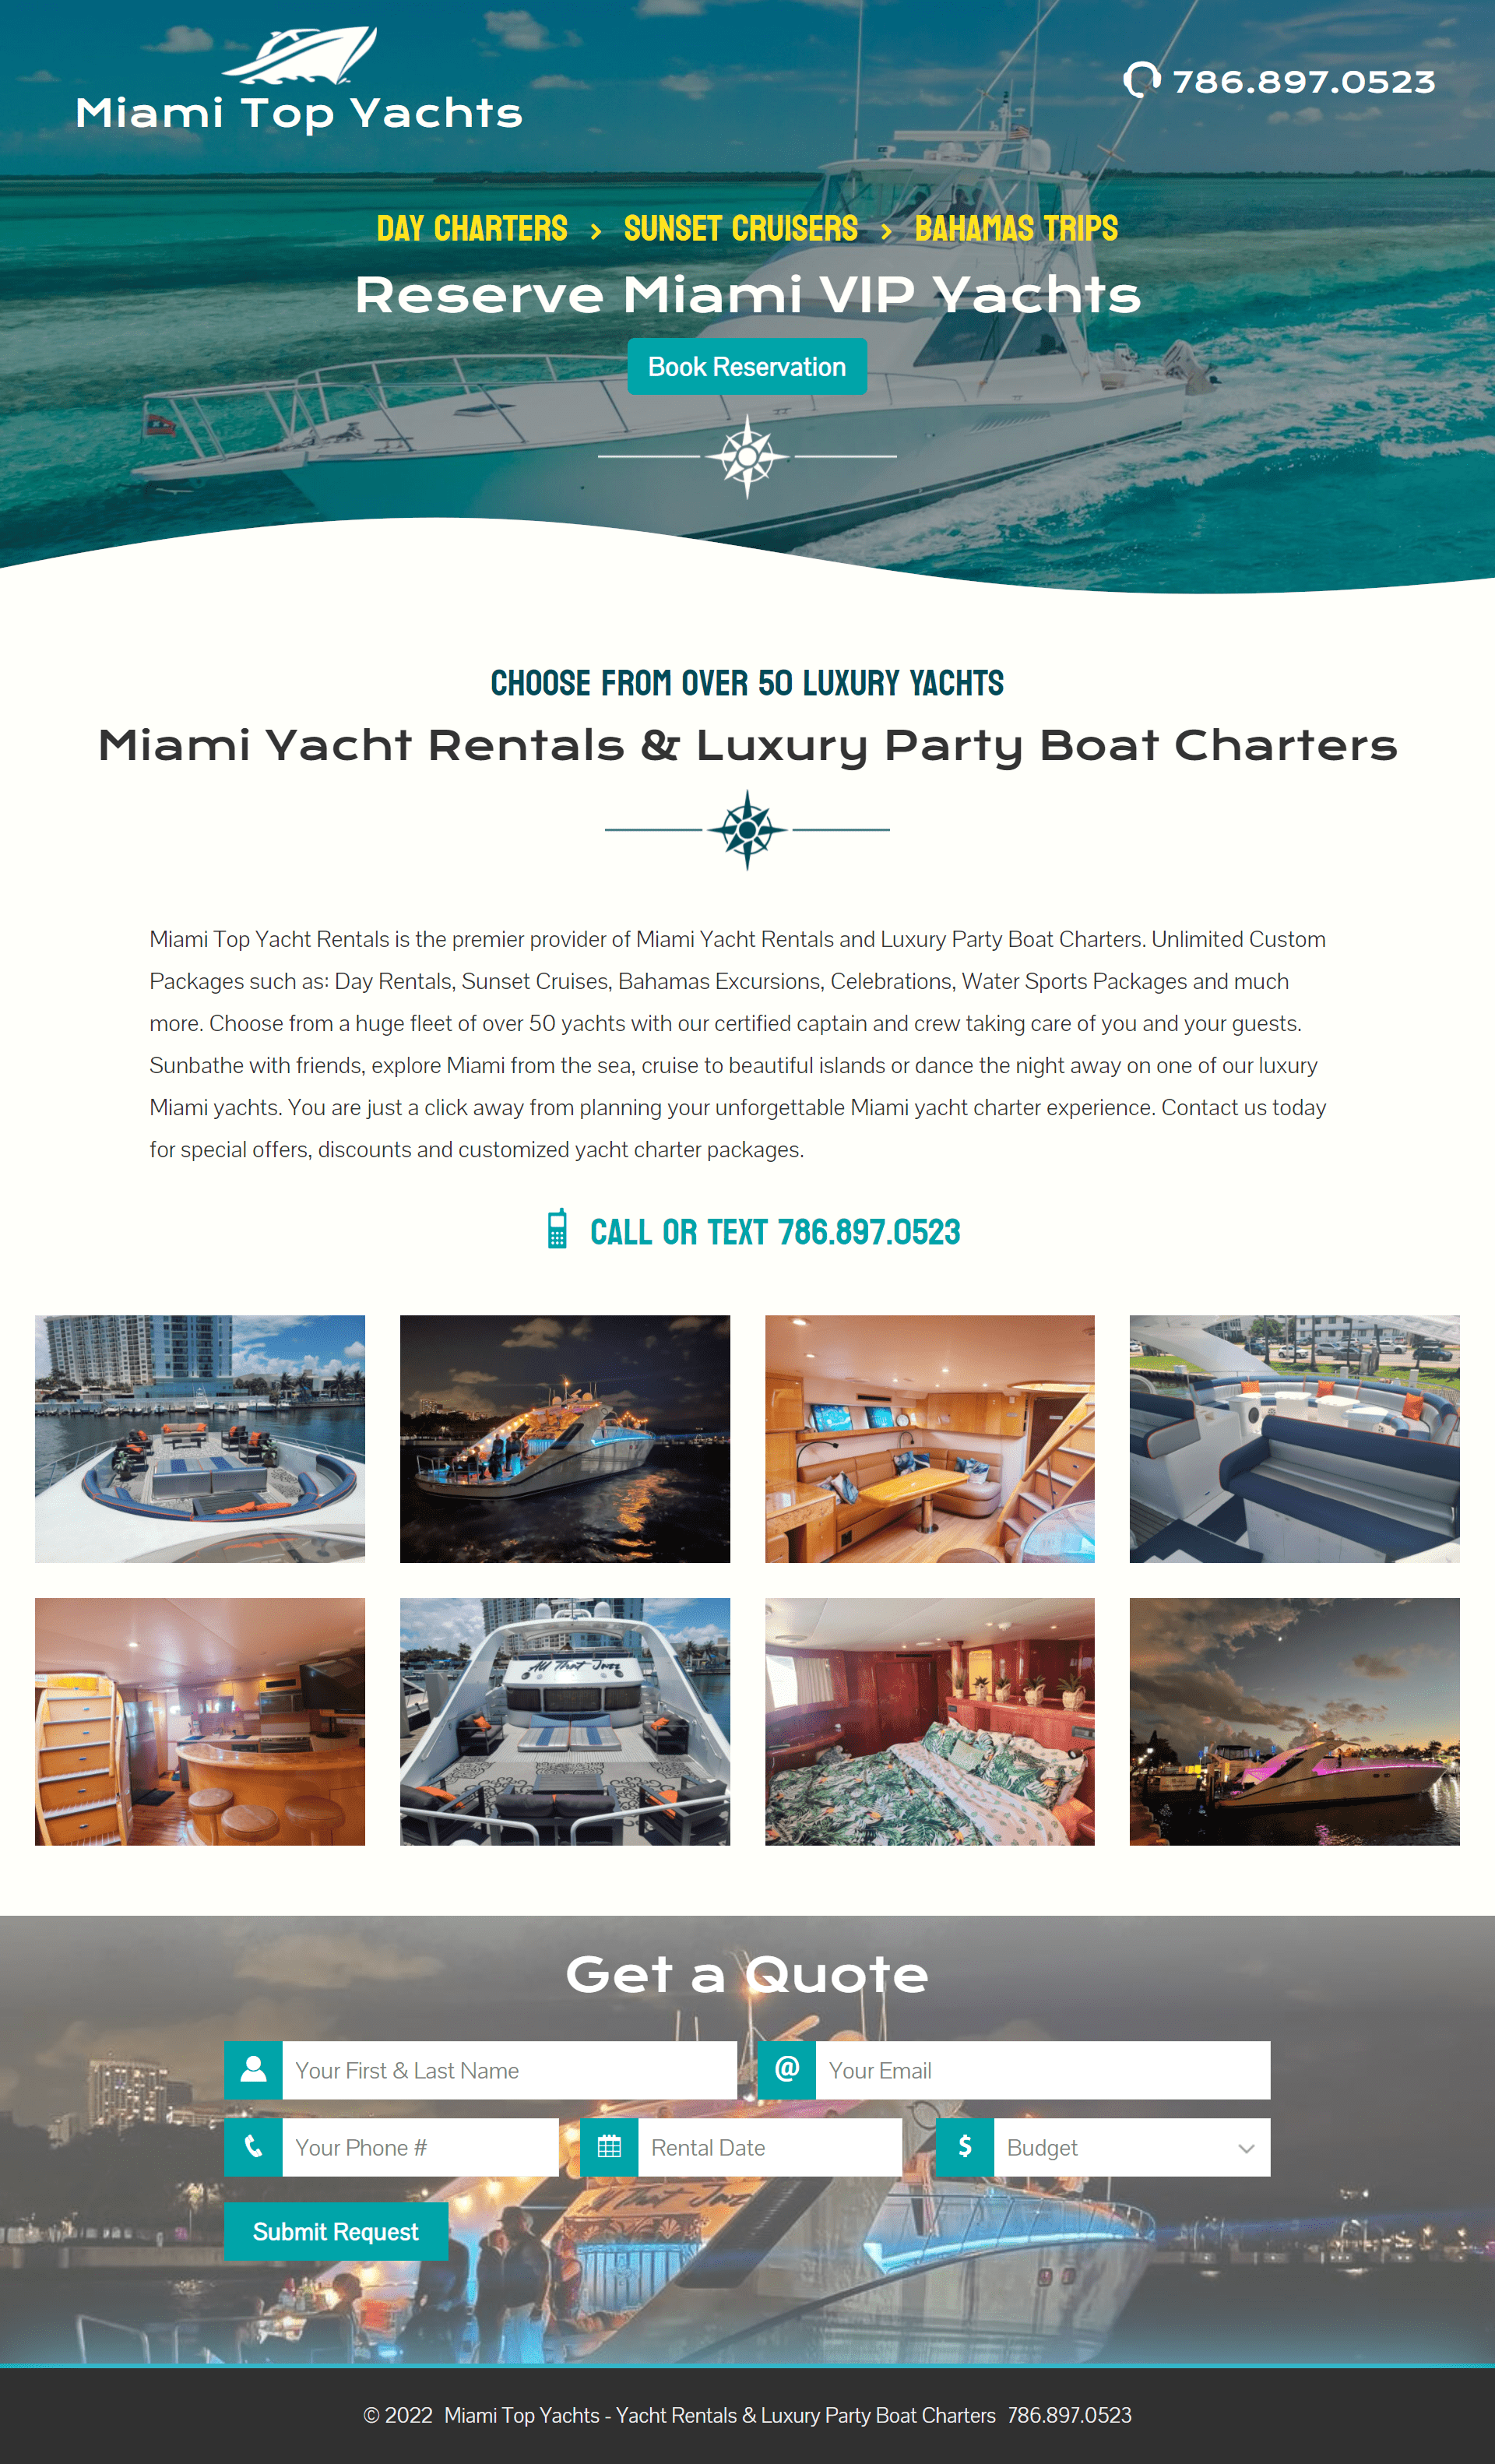 Miami Top Yachts website by Jesse The Web Guy